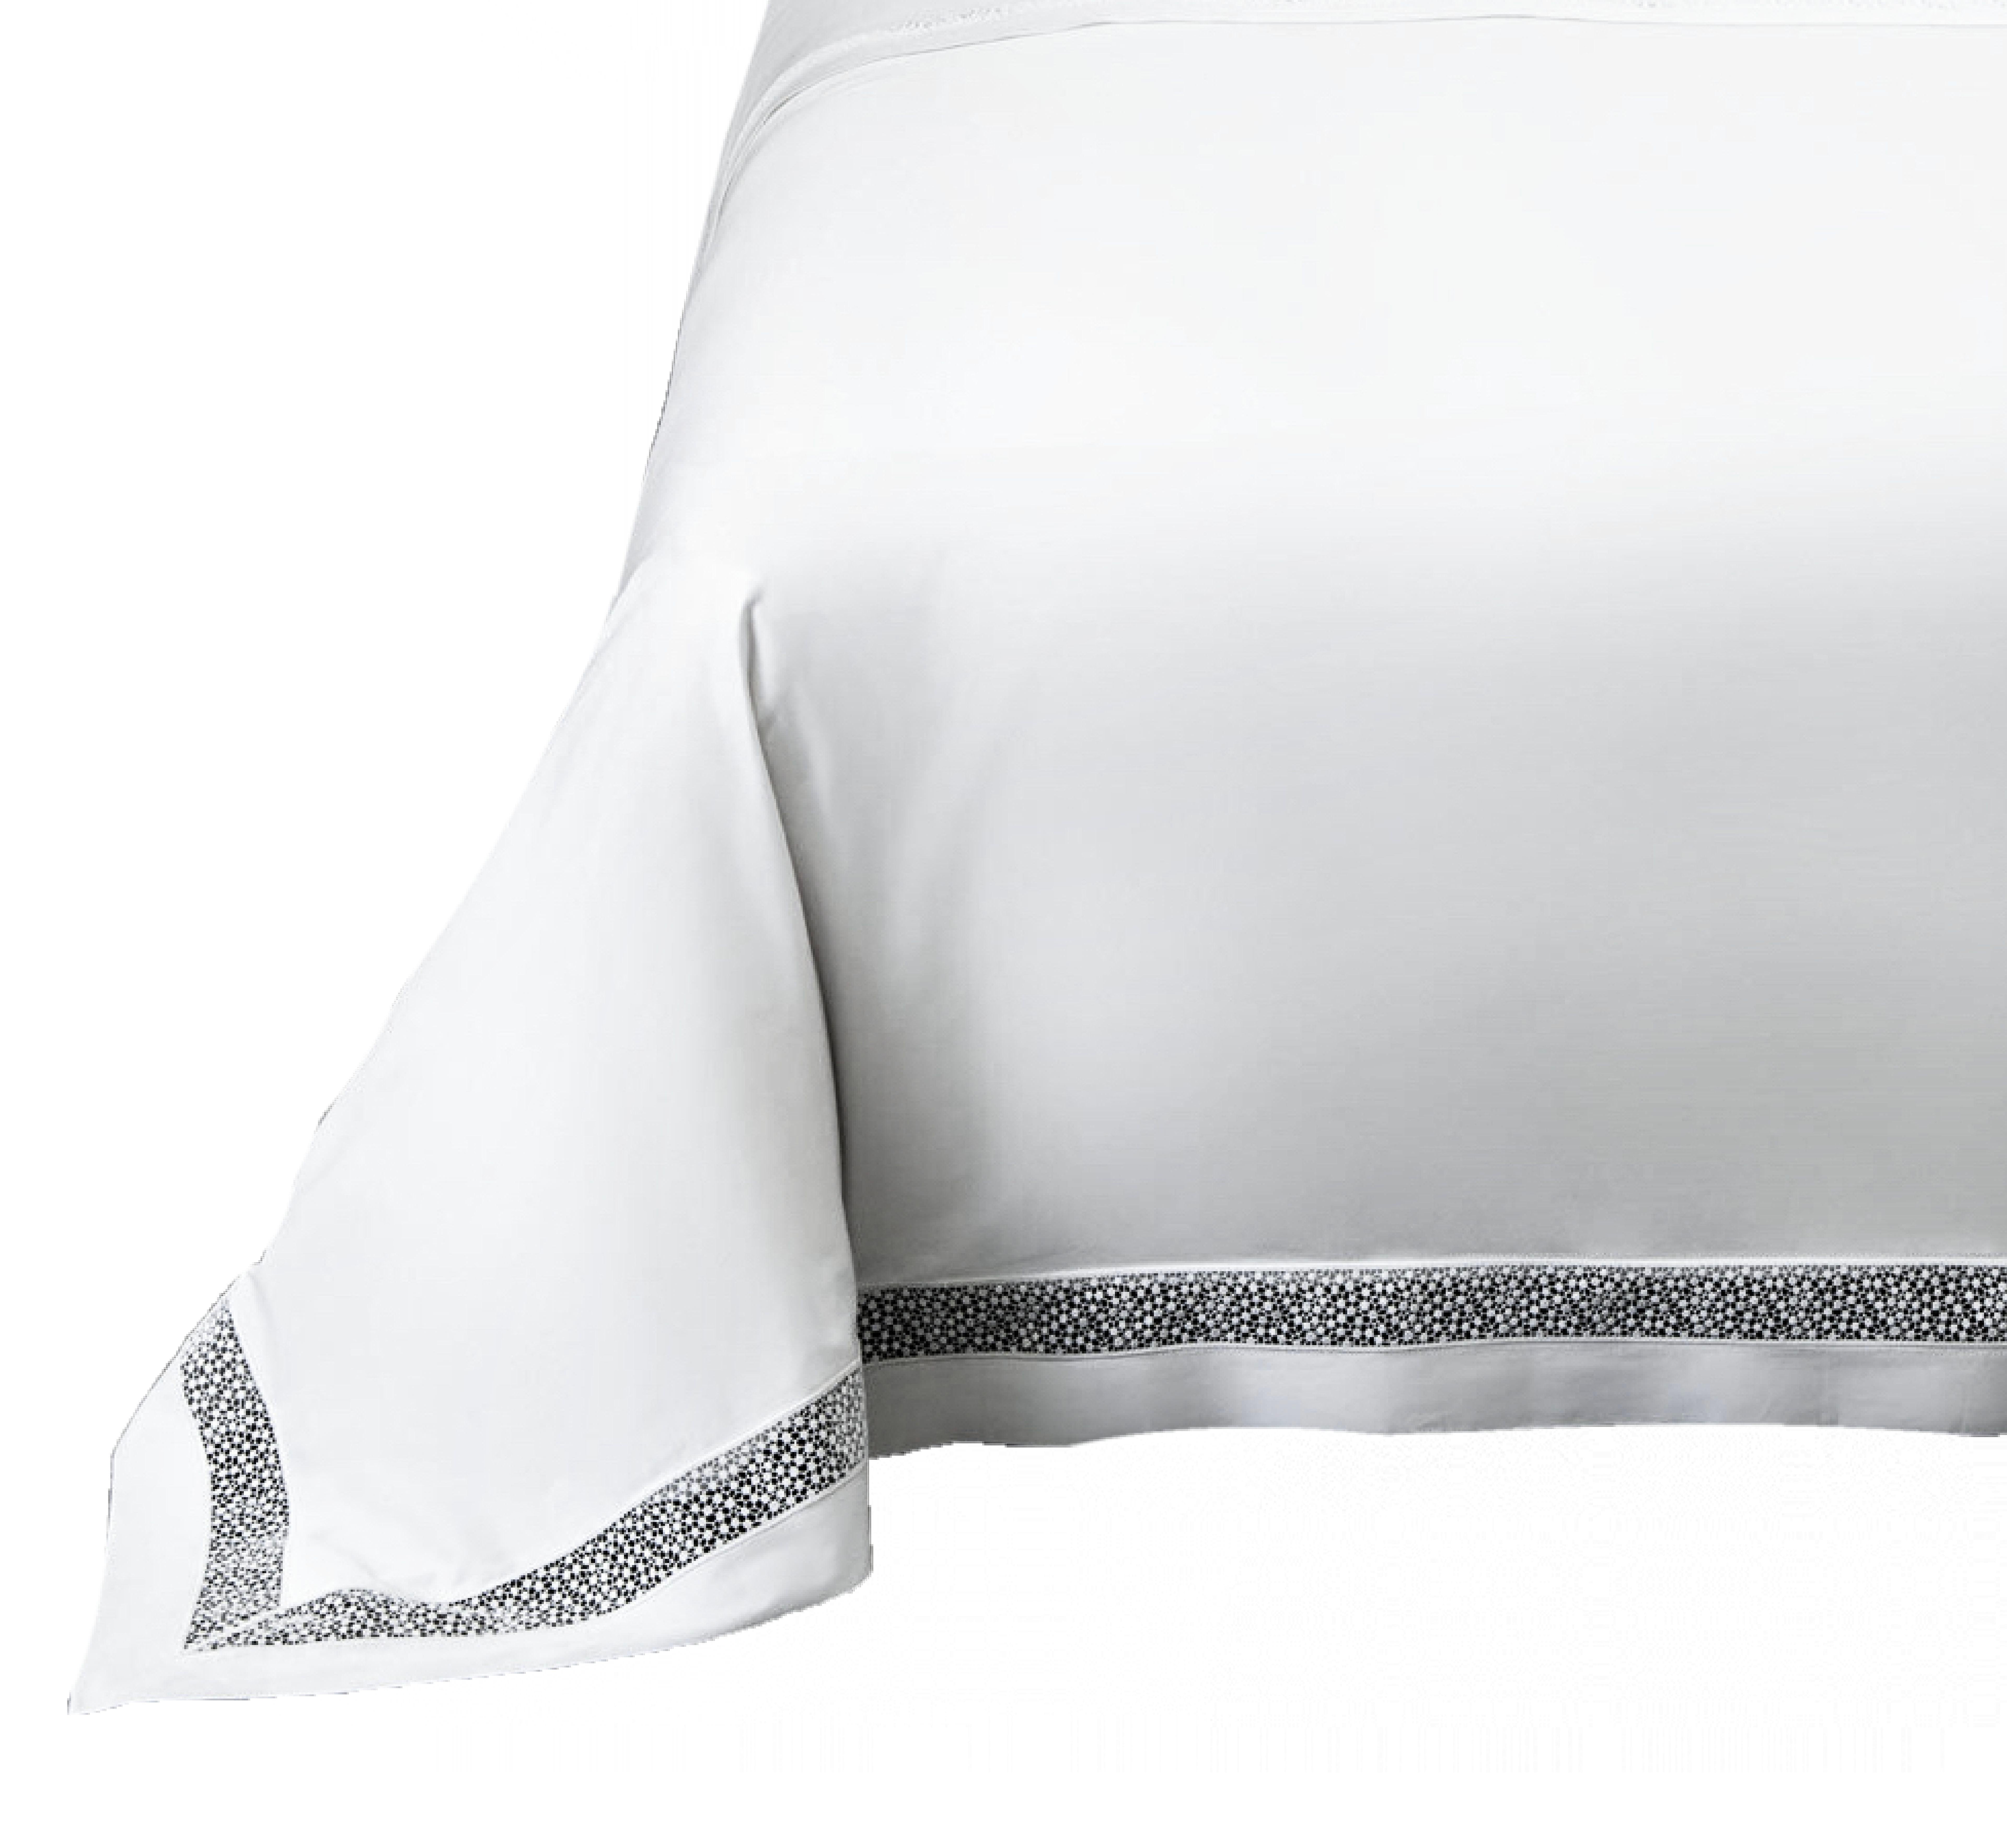 Frette Forever Lace Couture Weißer Teppichbezug mit Spitze, Italien